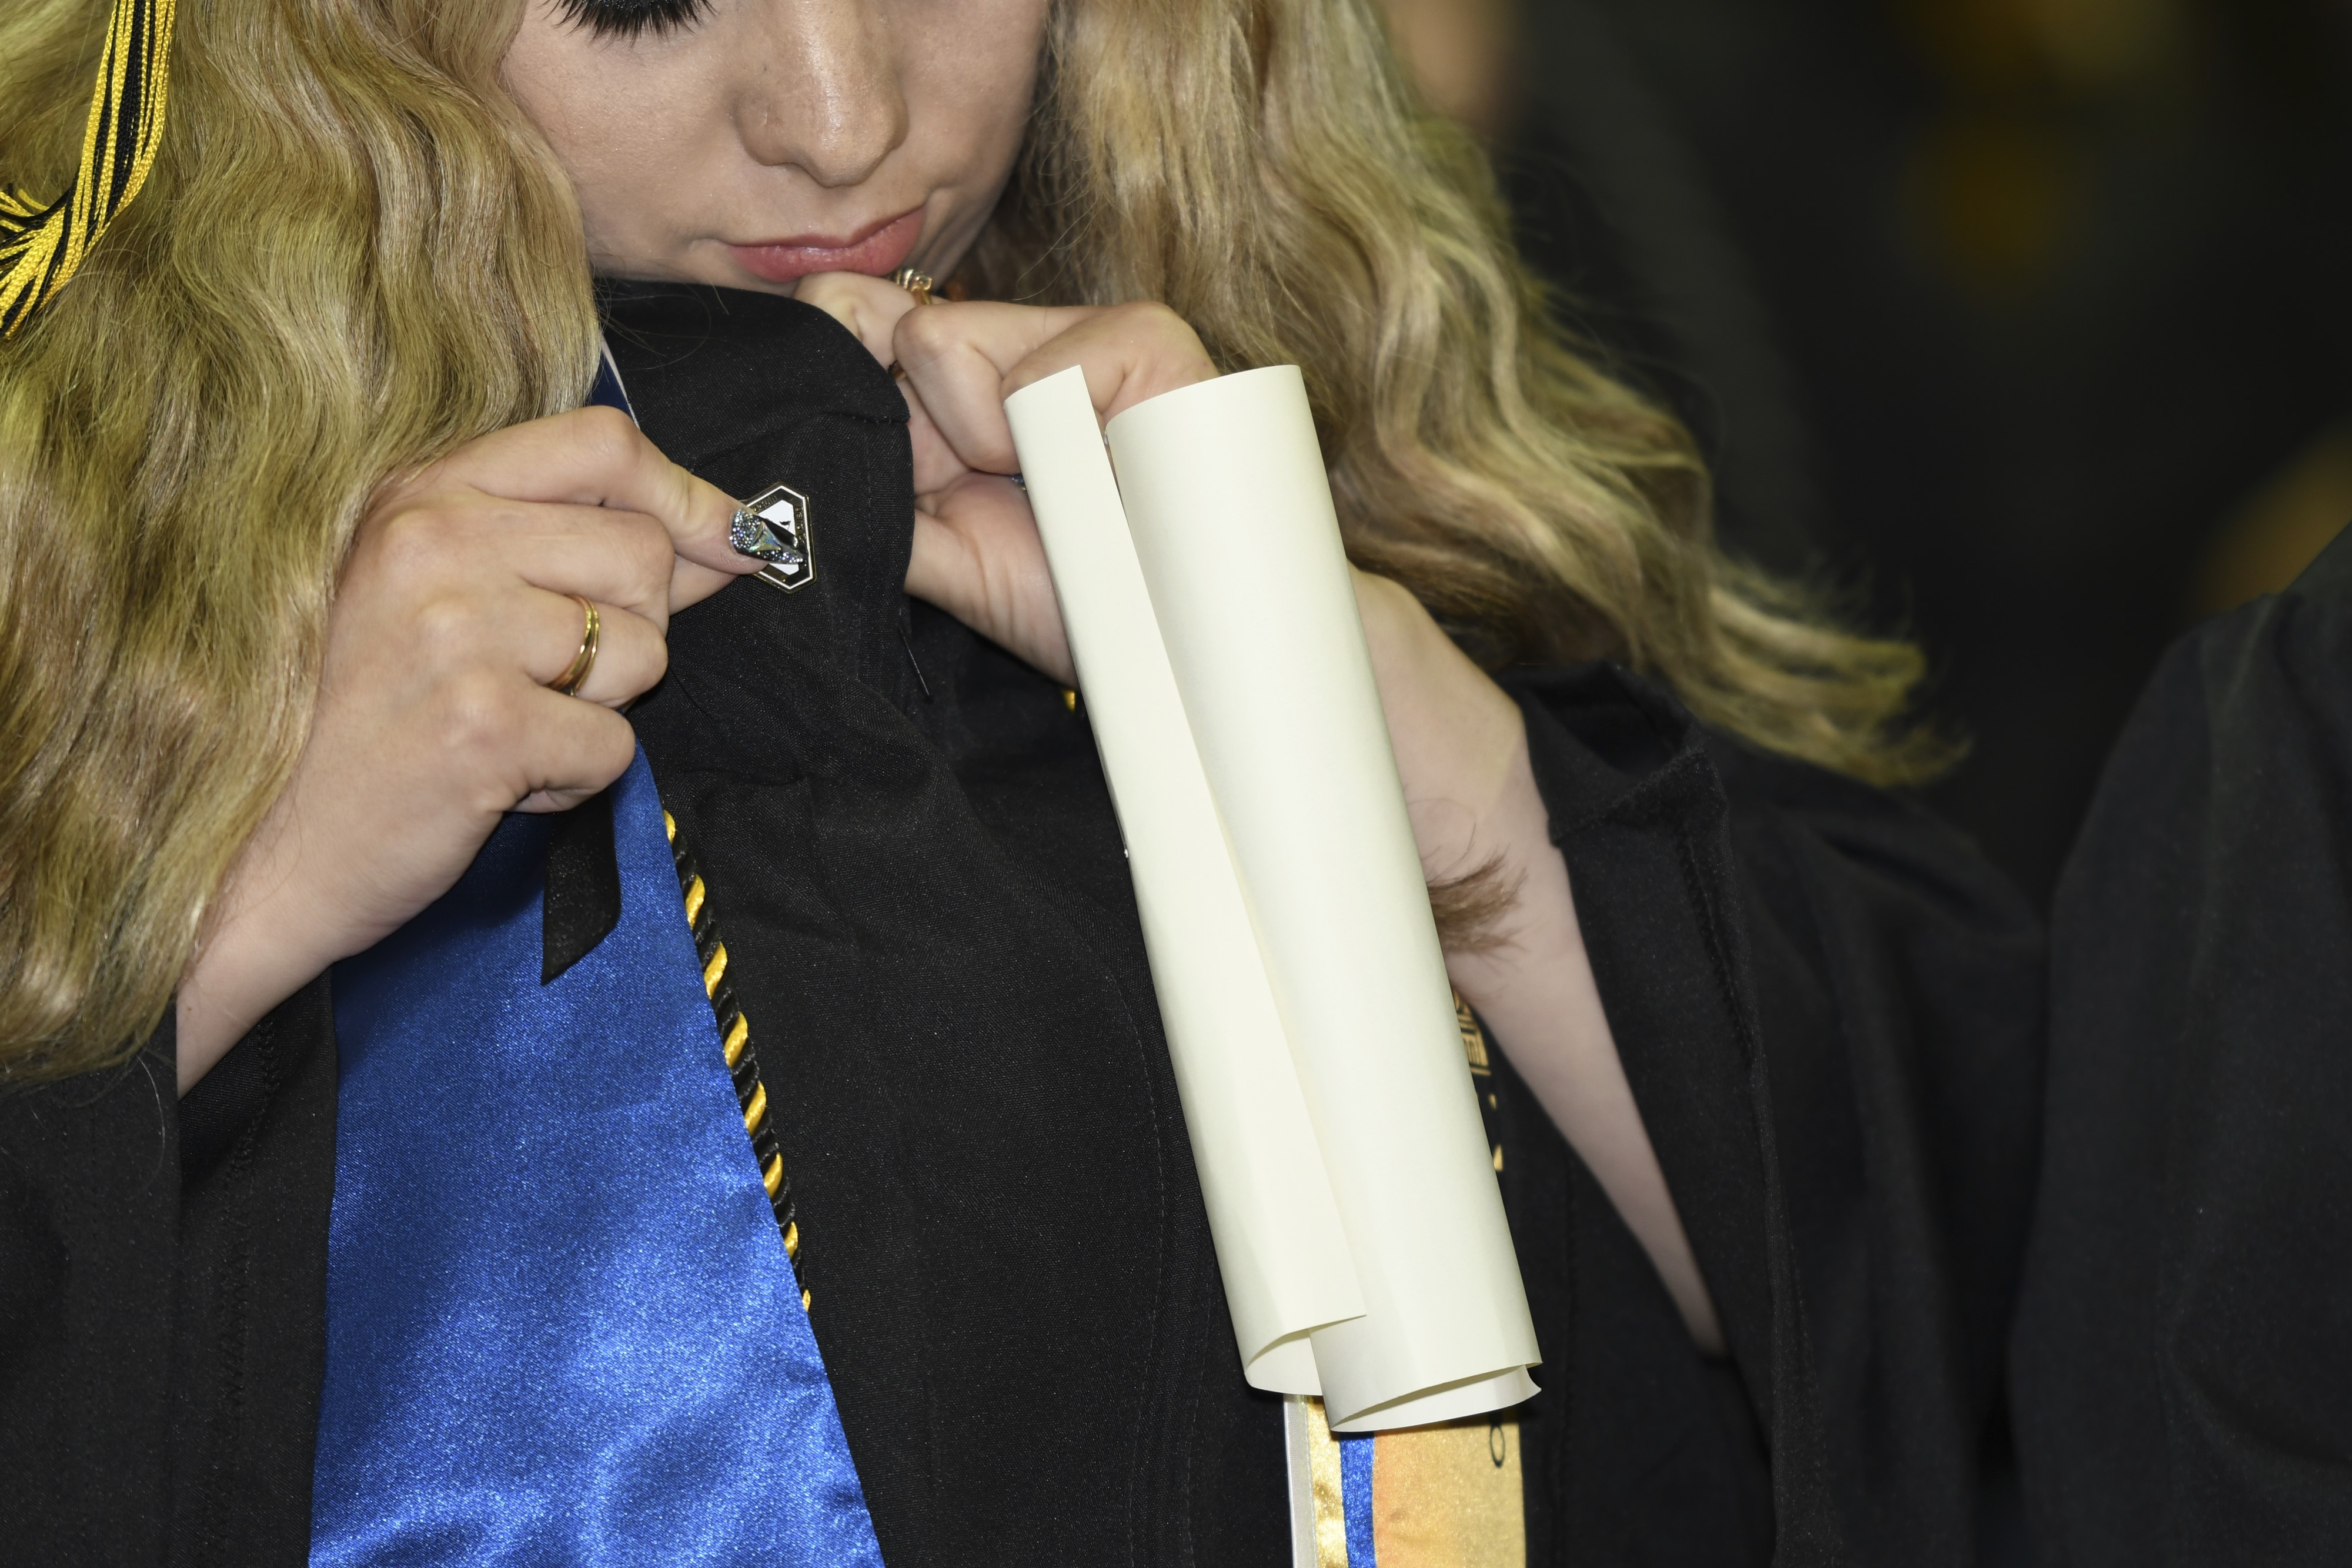 A new San Joaquin Delta College graduate puts on her alumni pin during the College's Commencement ceremony.